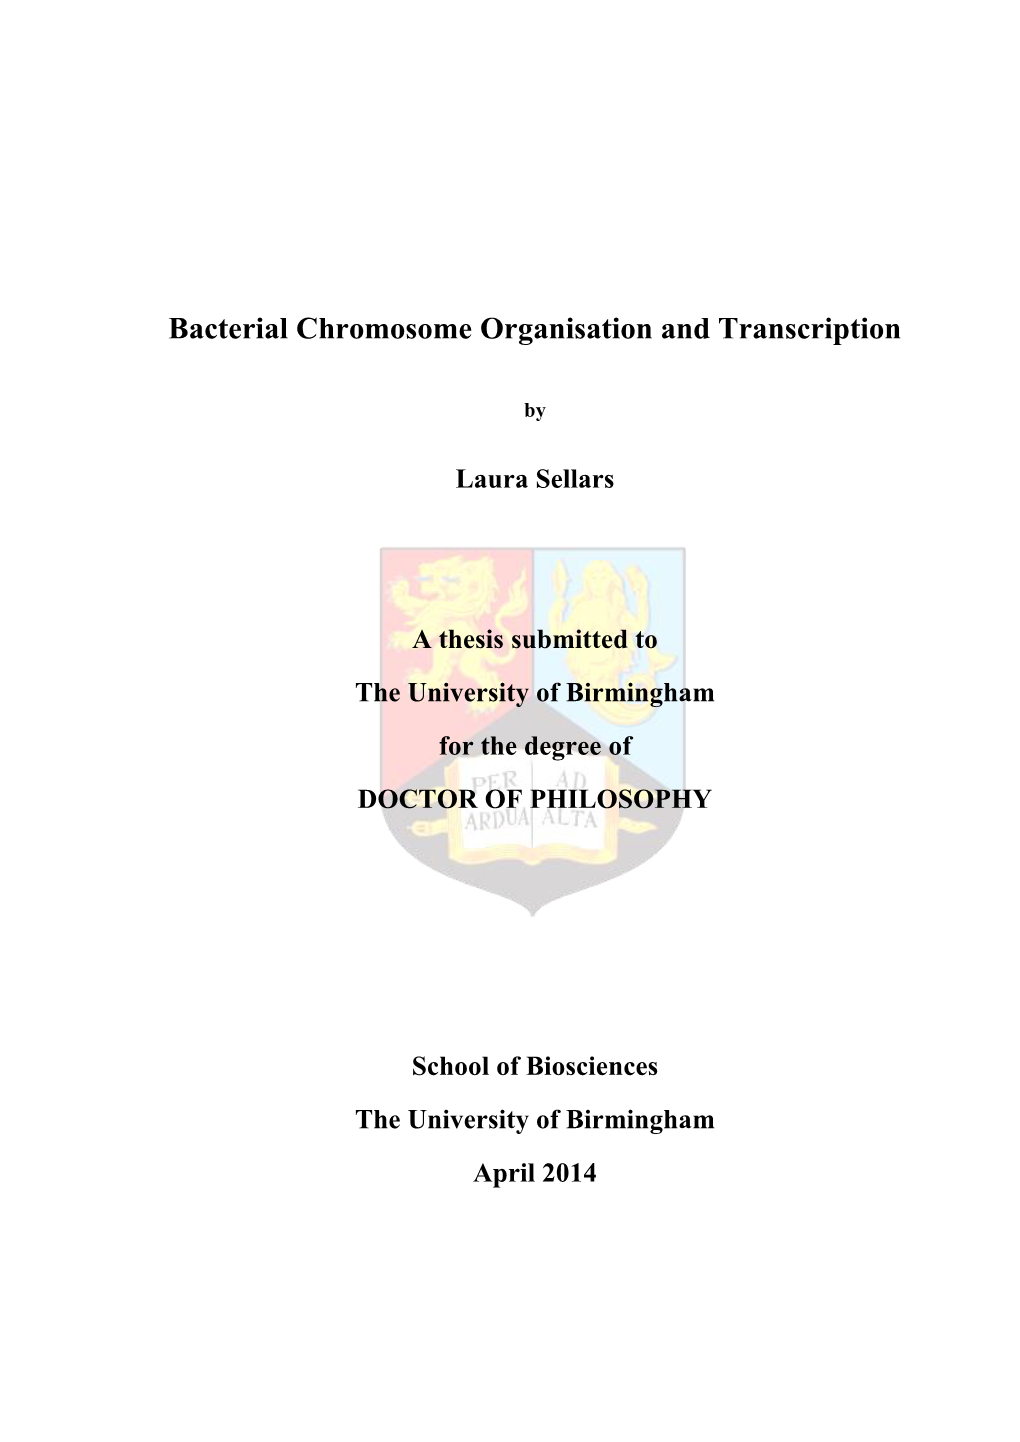 Bacterial Chromosome Organisation and Transcription